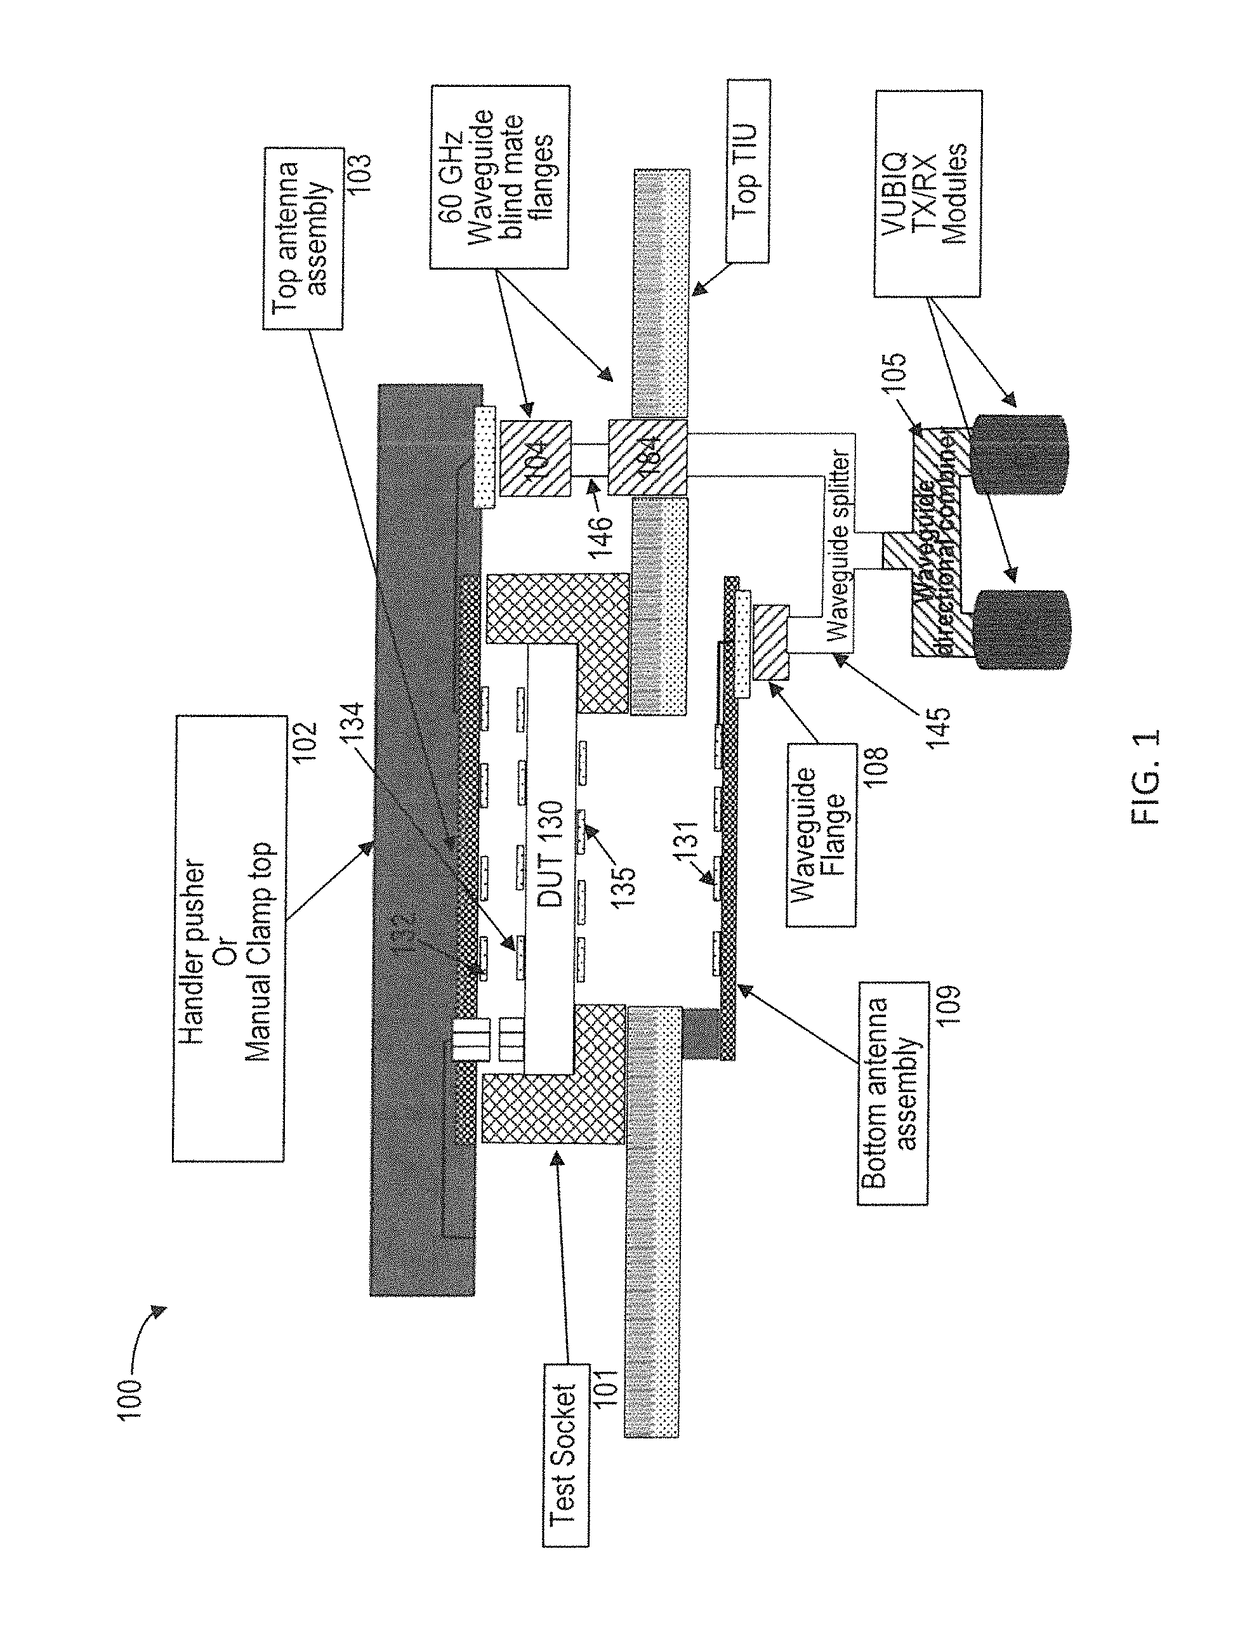 Handler with integrated receiver and signal path interface to tester